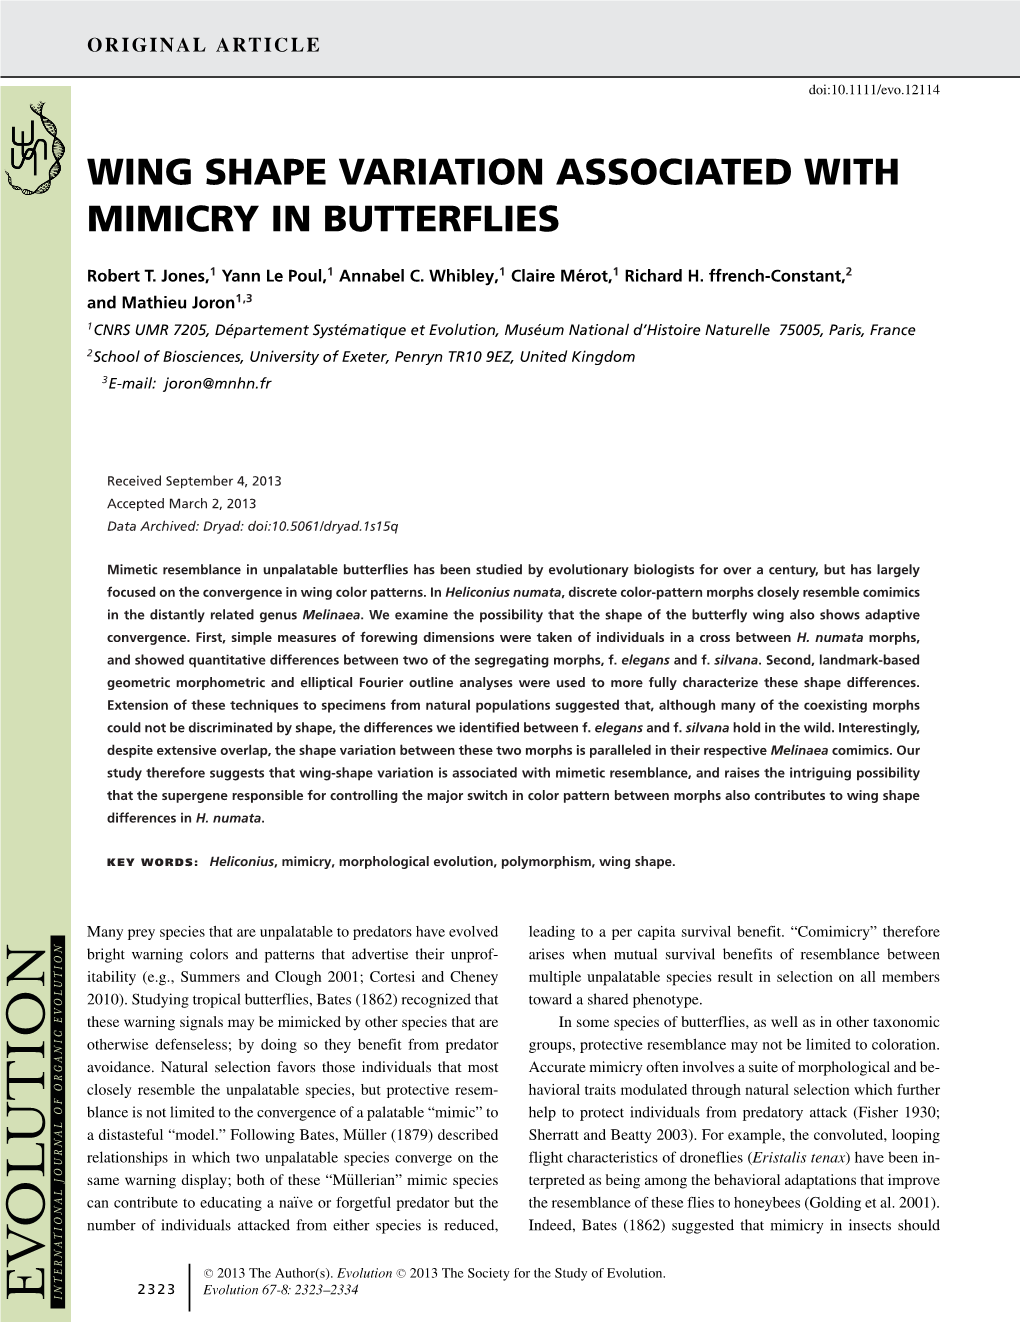 Wing Shape Variation Associated with Mimicry in Butterflies